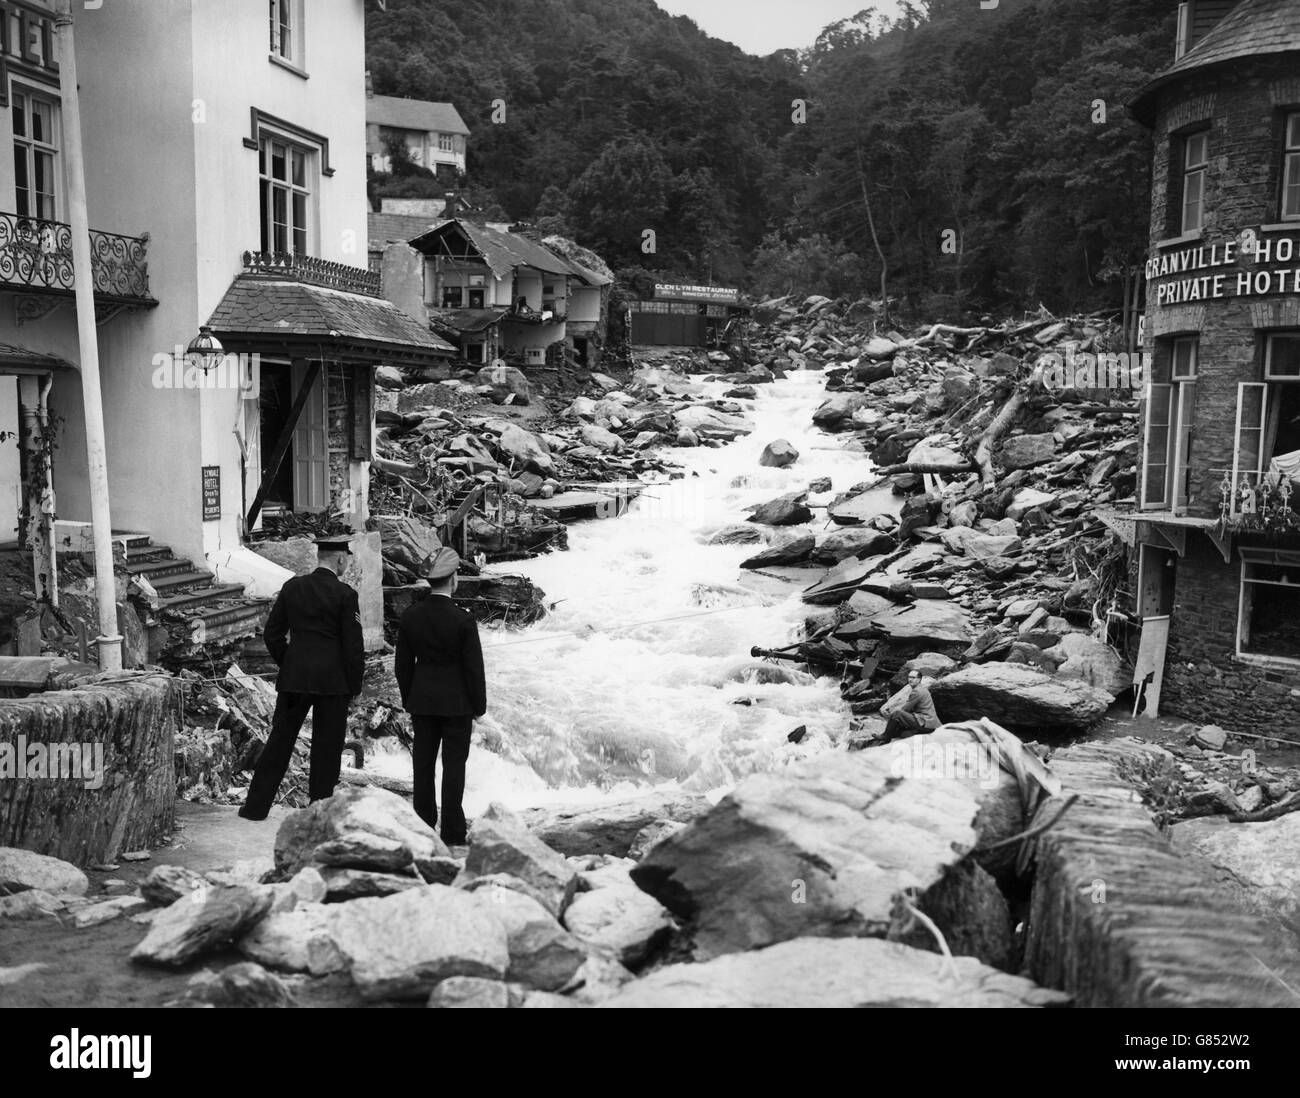 Police stand on the remains of a bridge in Lynmouth, Devon, which has been devastated by floods. Stock Photo